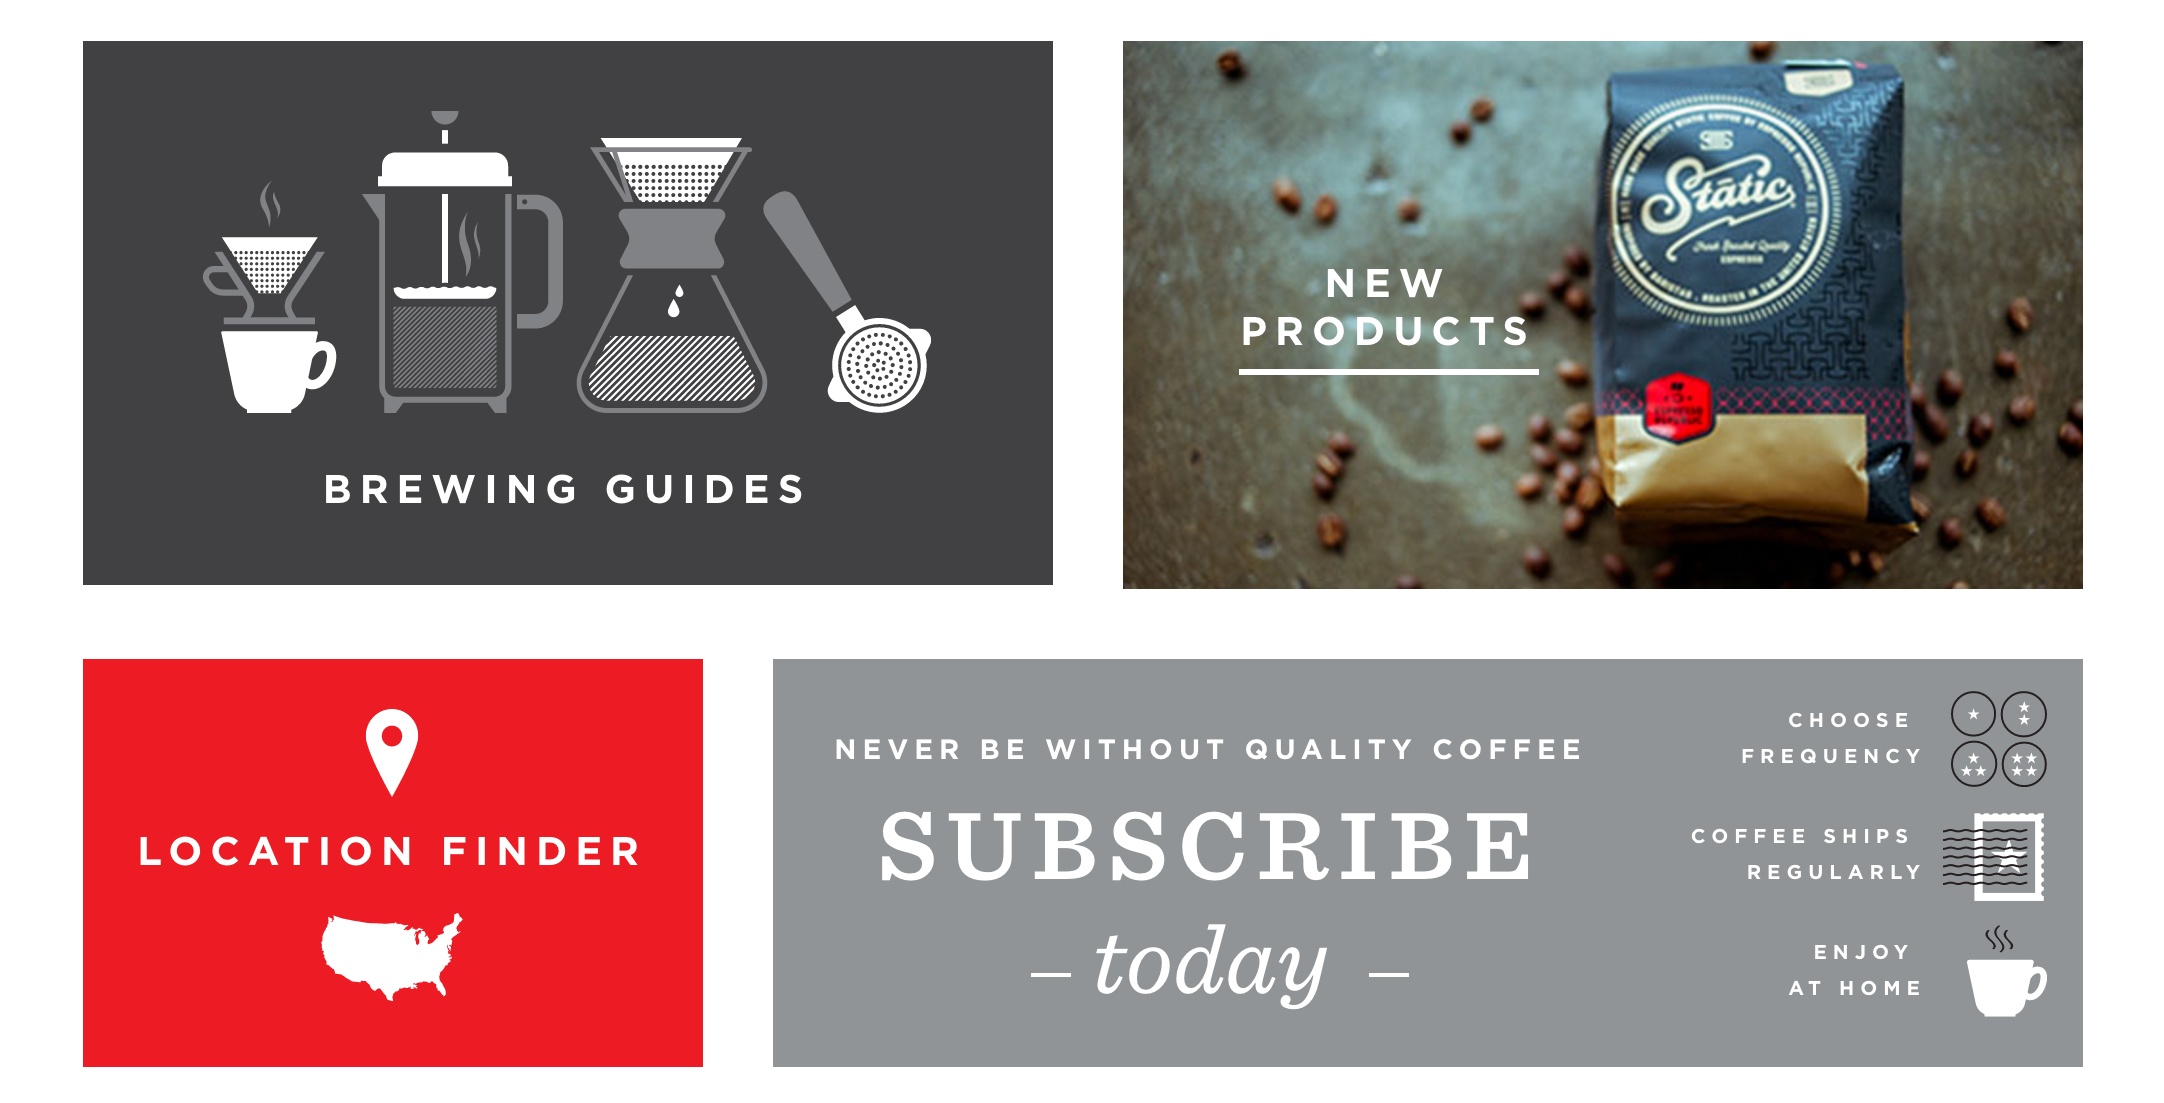 Wonderful coffee, and a subscription option made available for those of you who might like it.